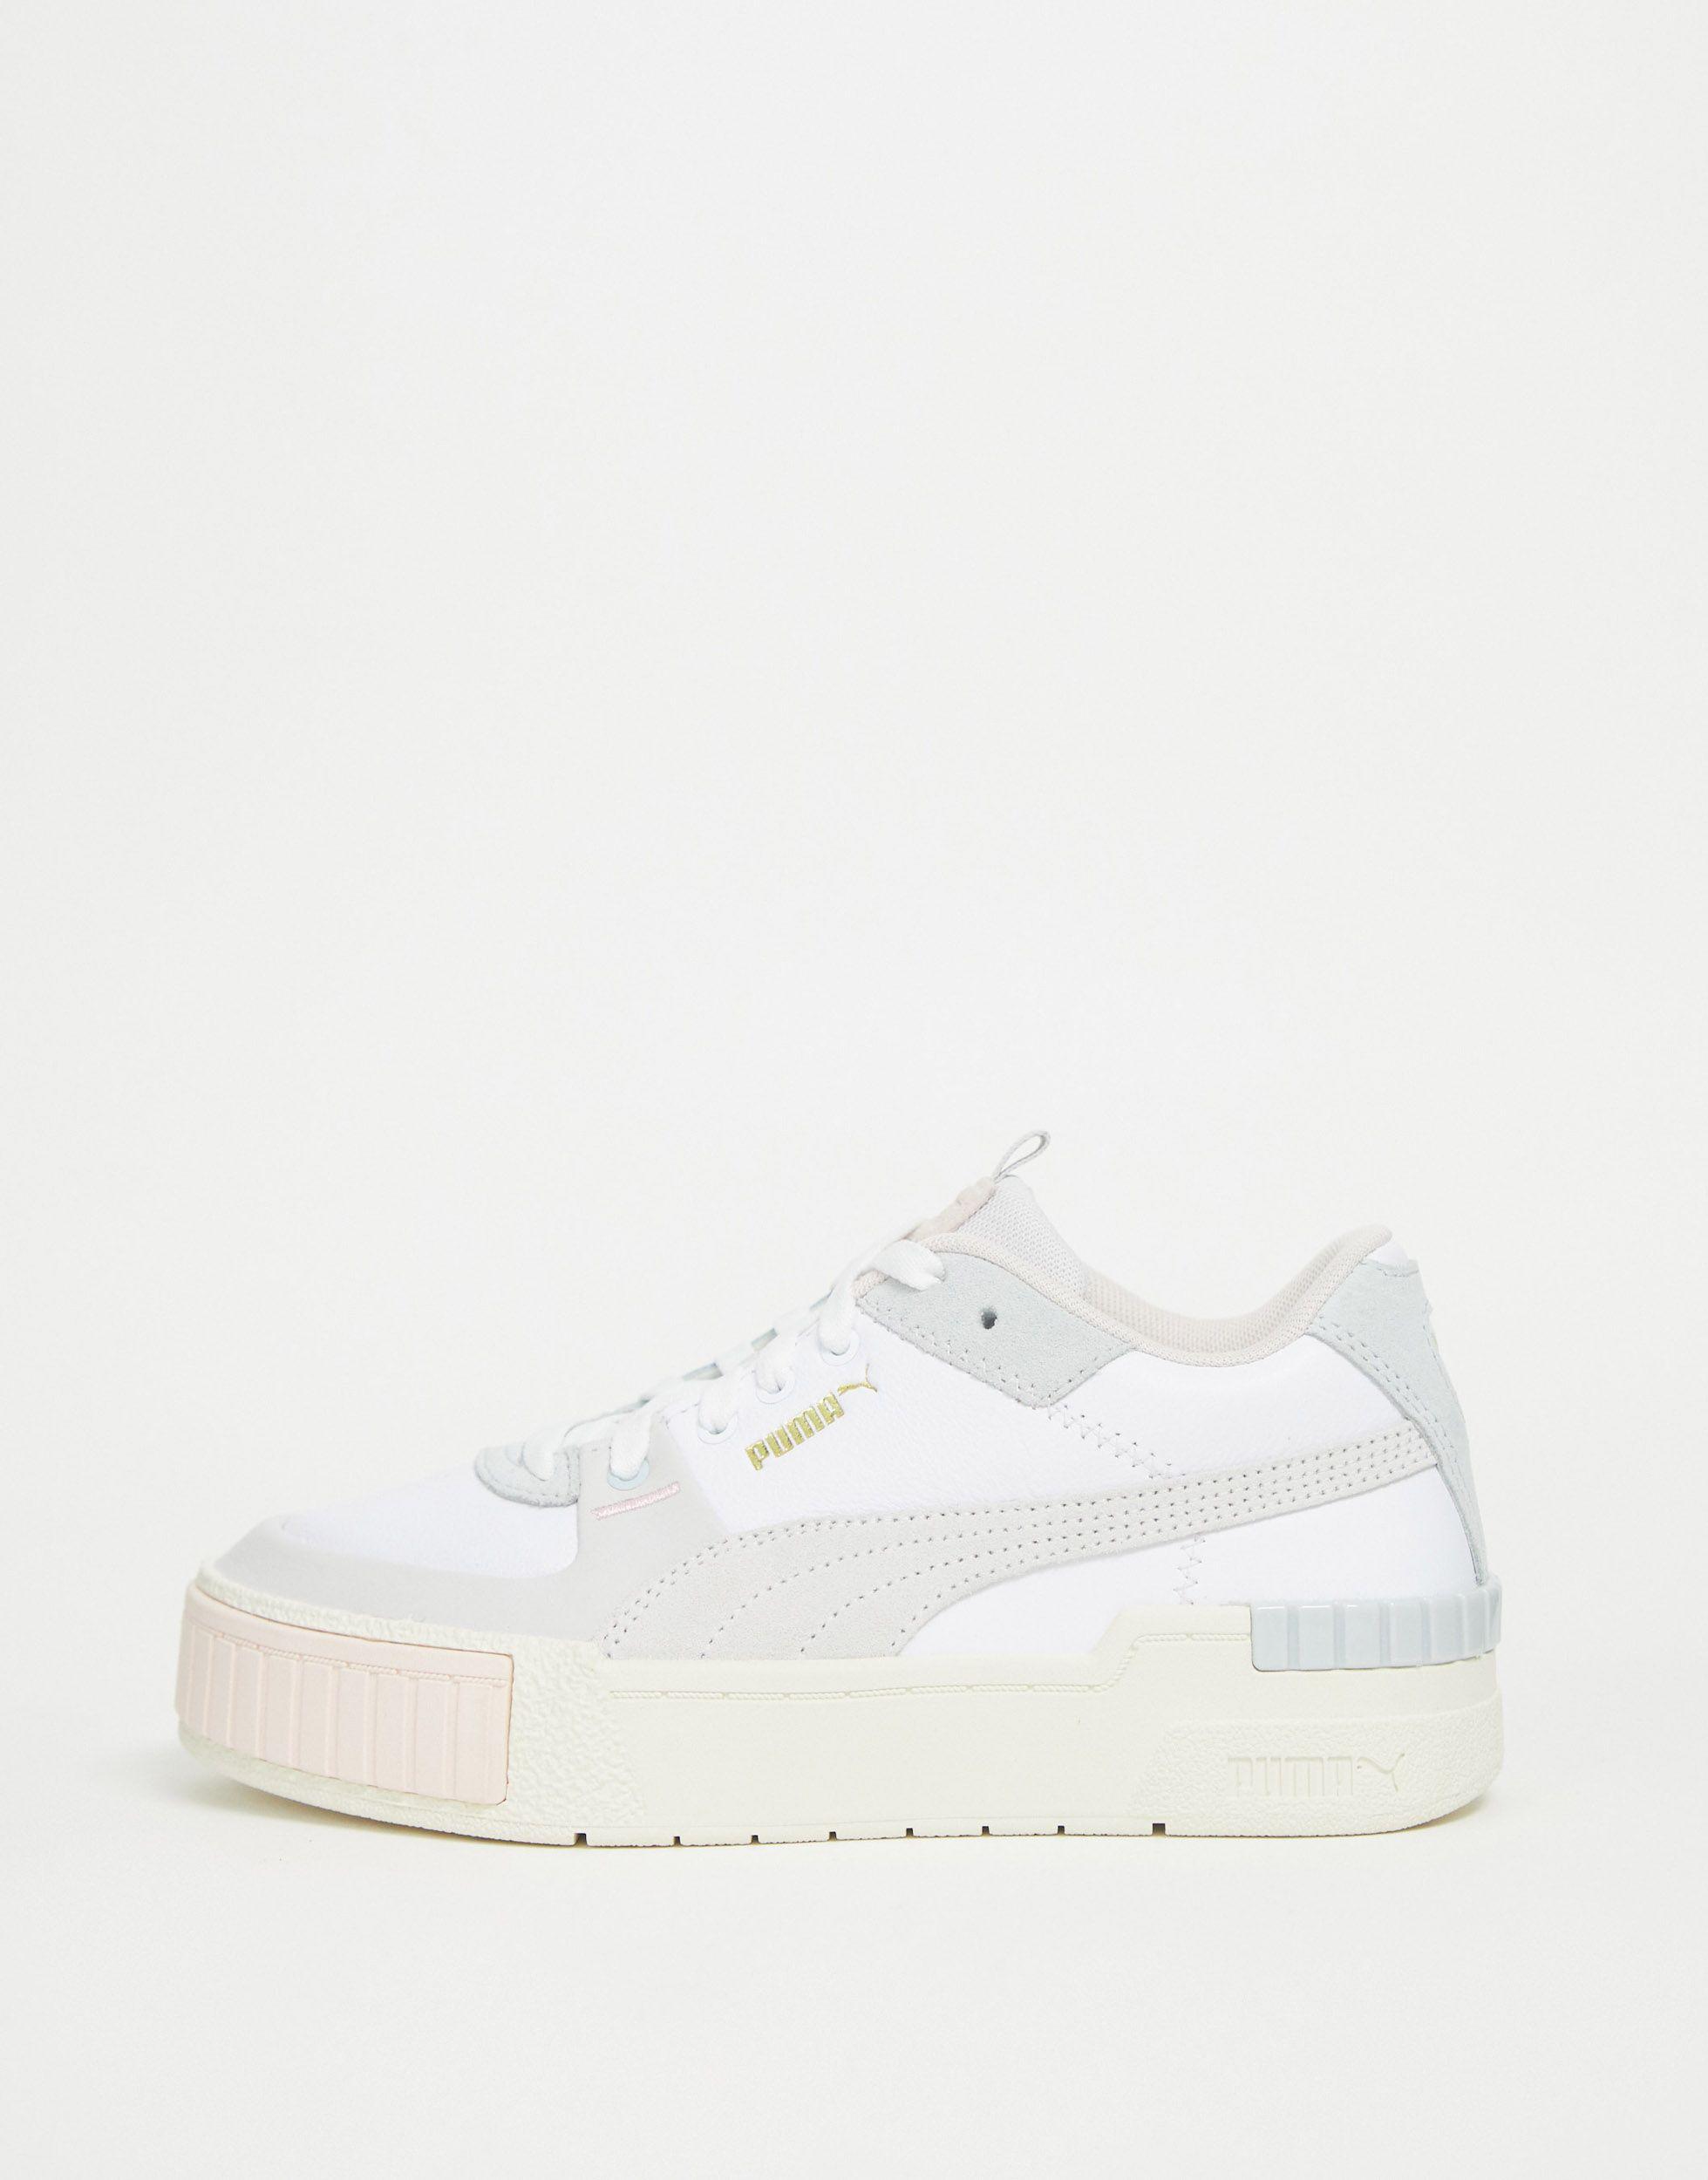 PUMA Leather Cali Sport Chunky Sneakers in White | Lyst